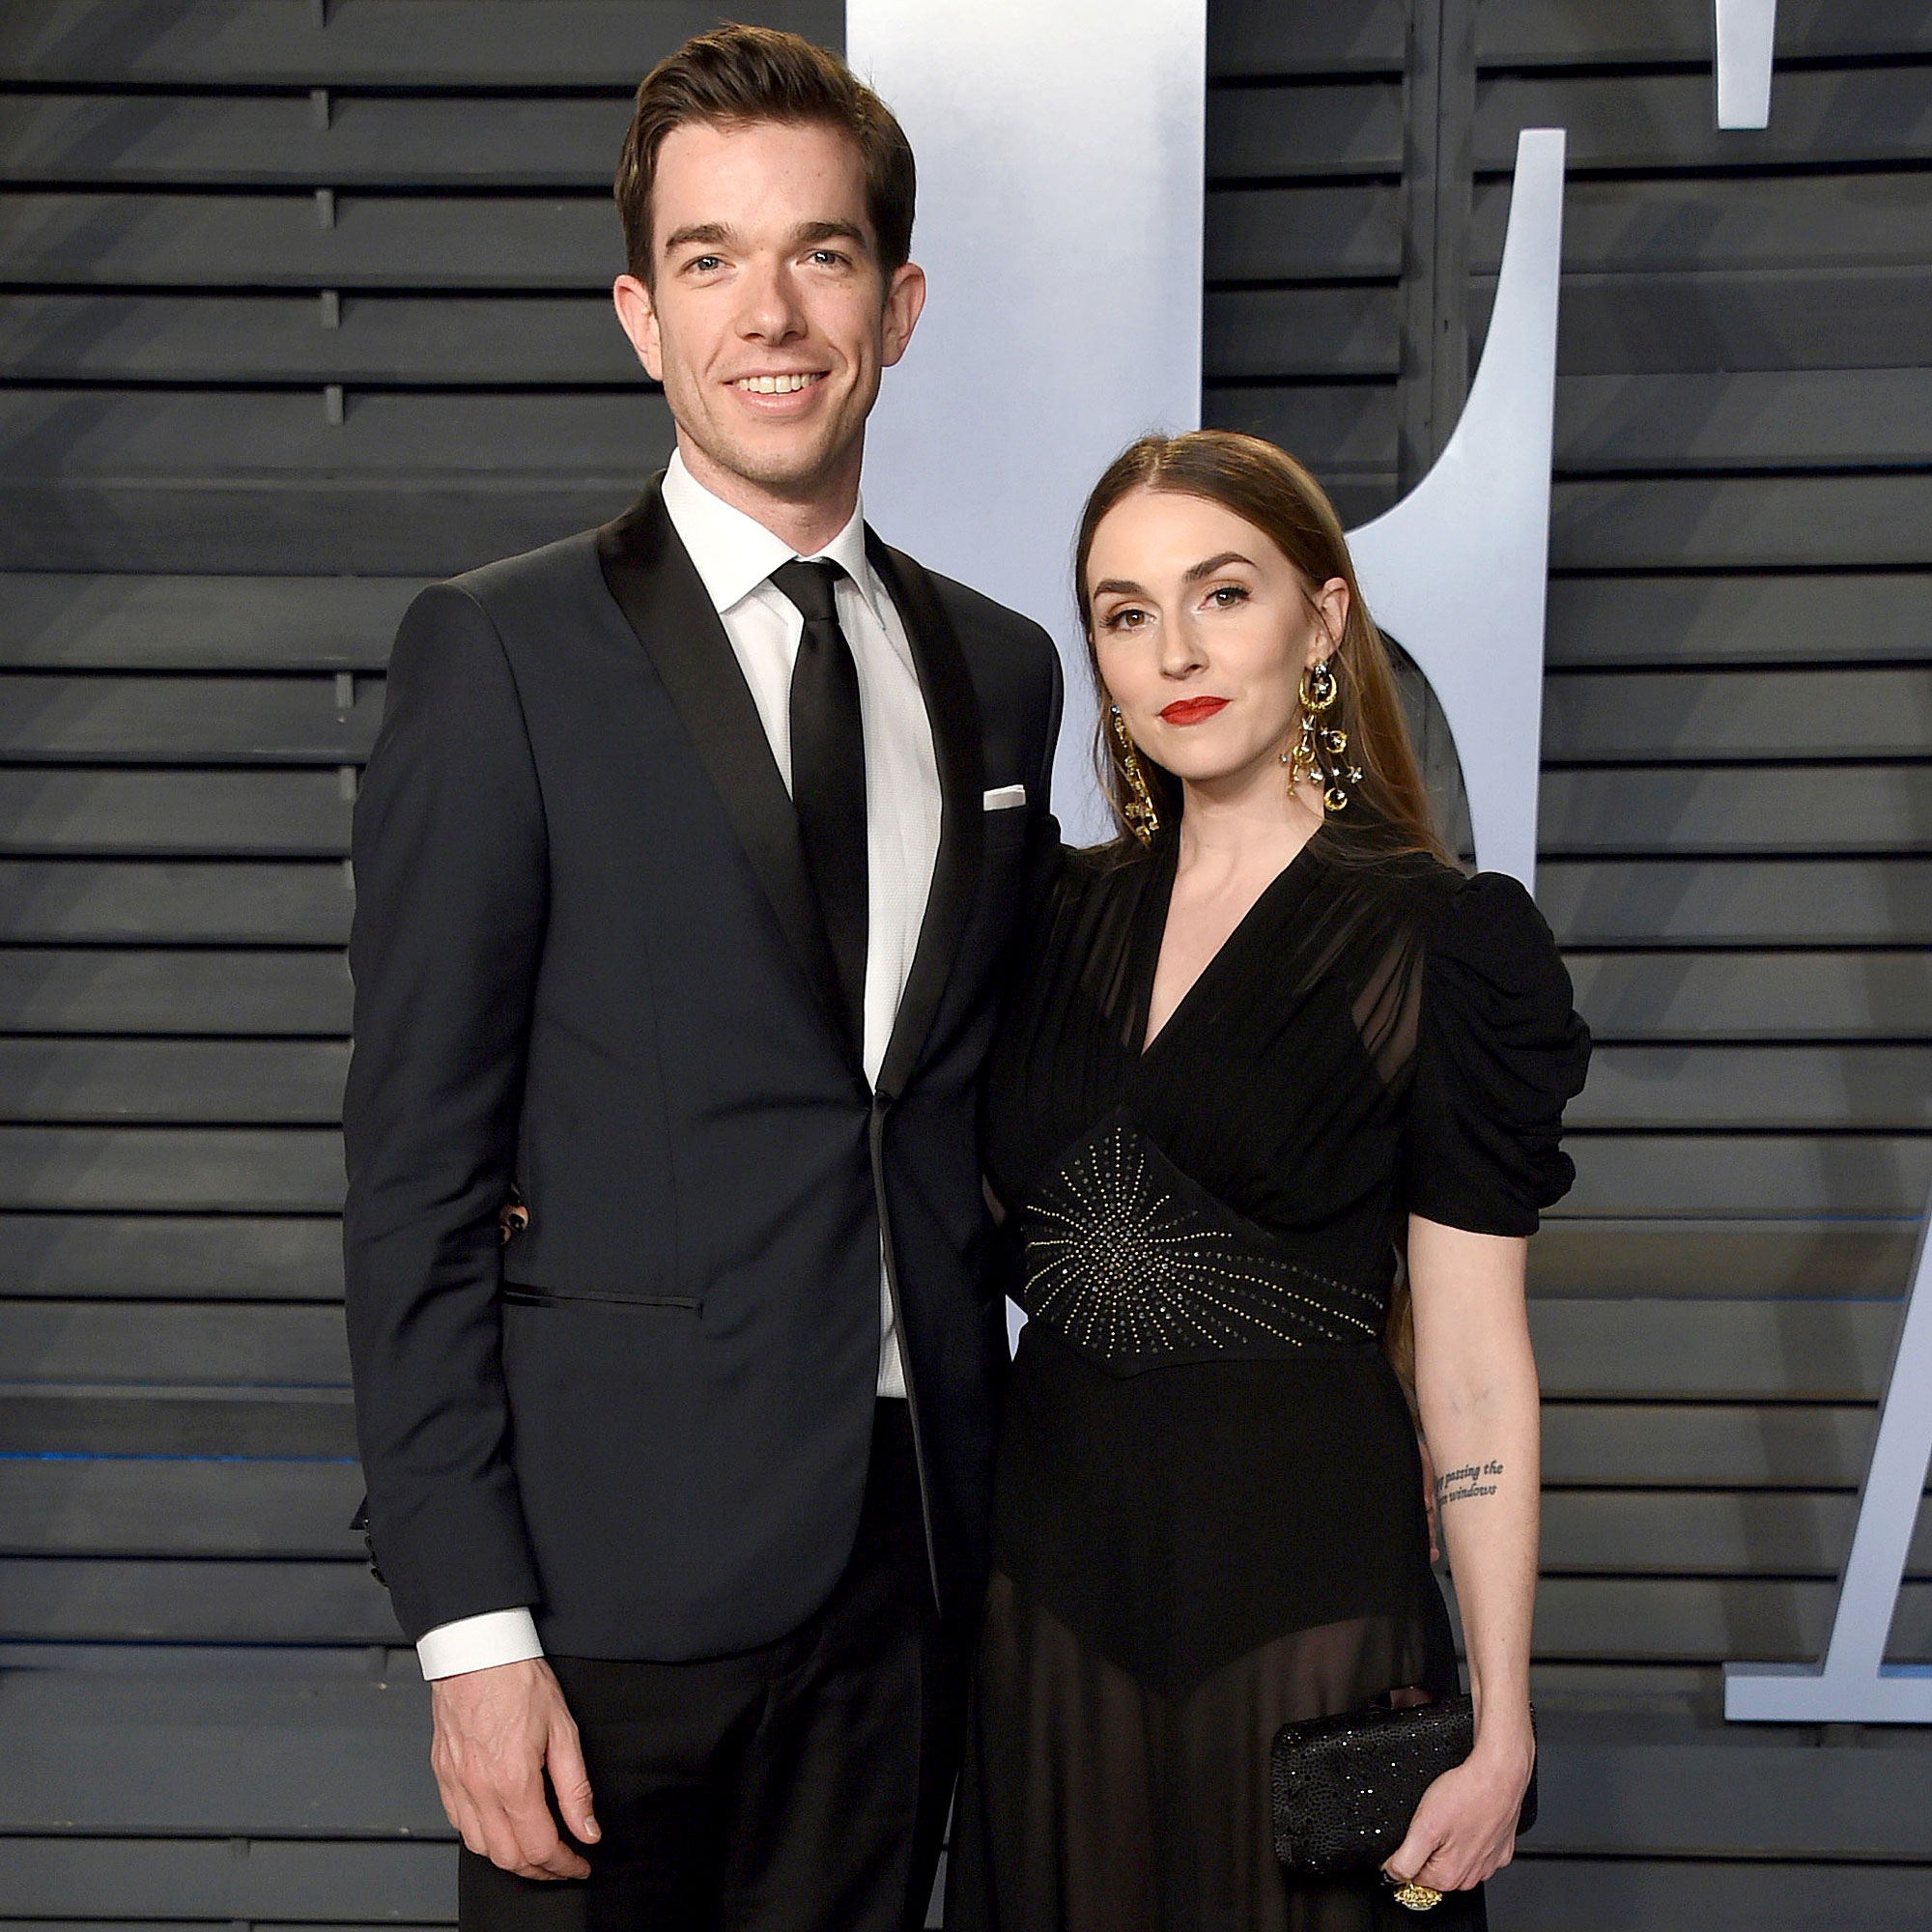 Anna Marie Tendler 5 Things to Know After John Mulaney Split picture